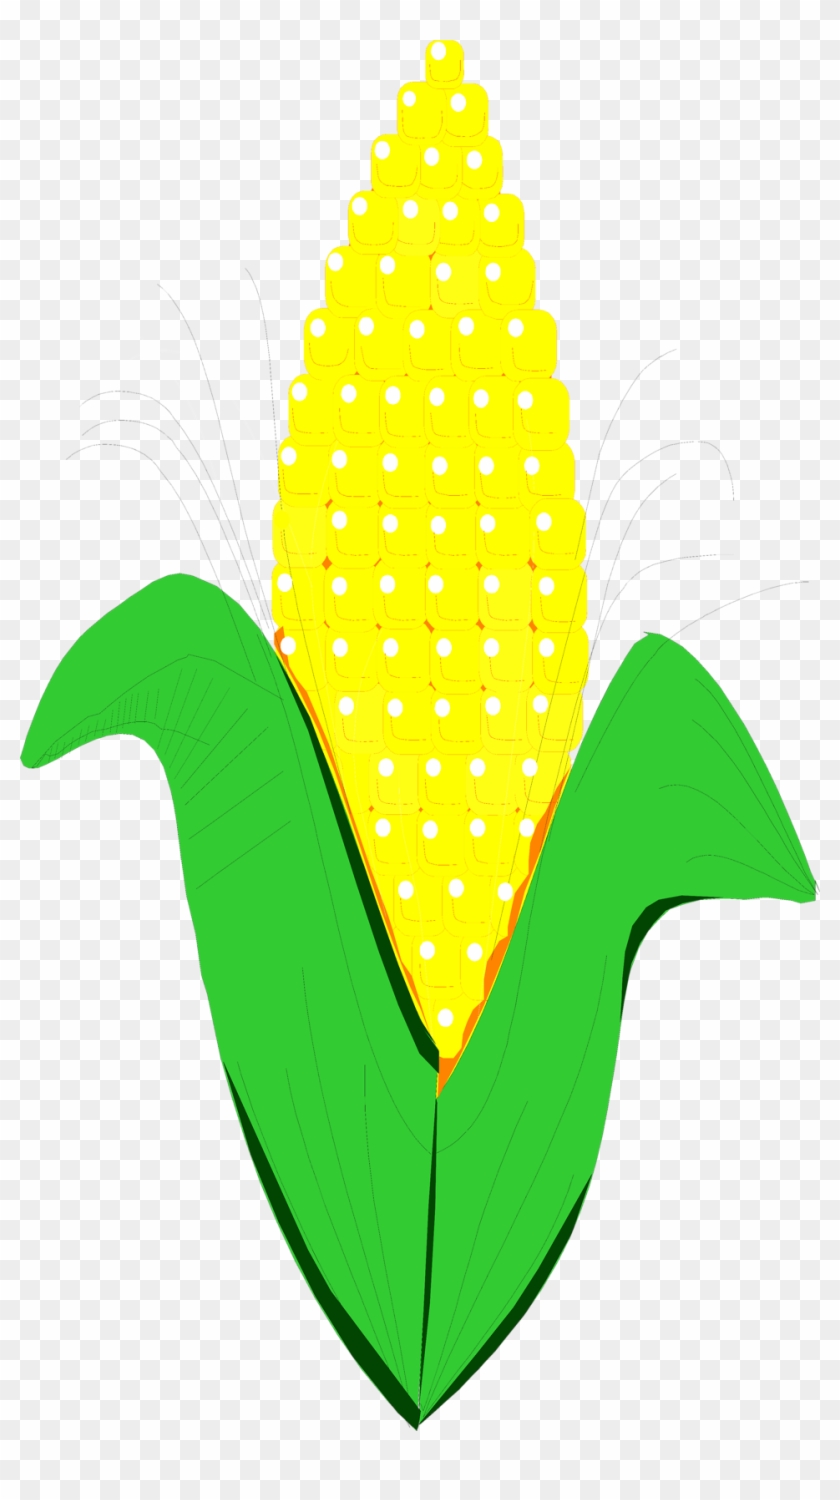 Corn Being Cut Clipart - Animated Corn Transparent Background - Png Download #1015172